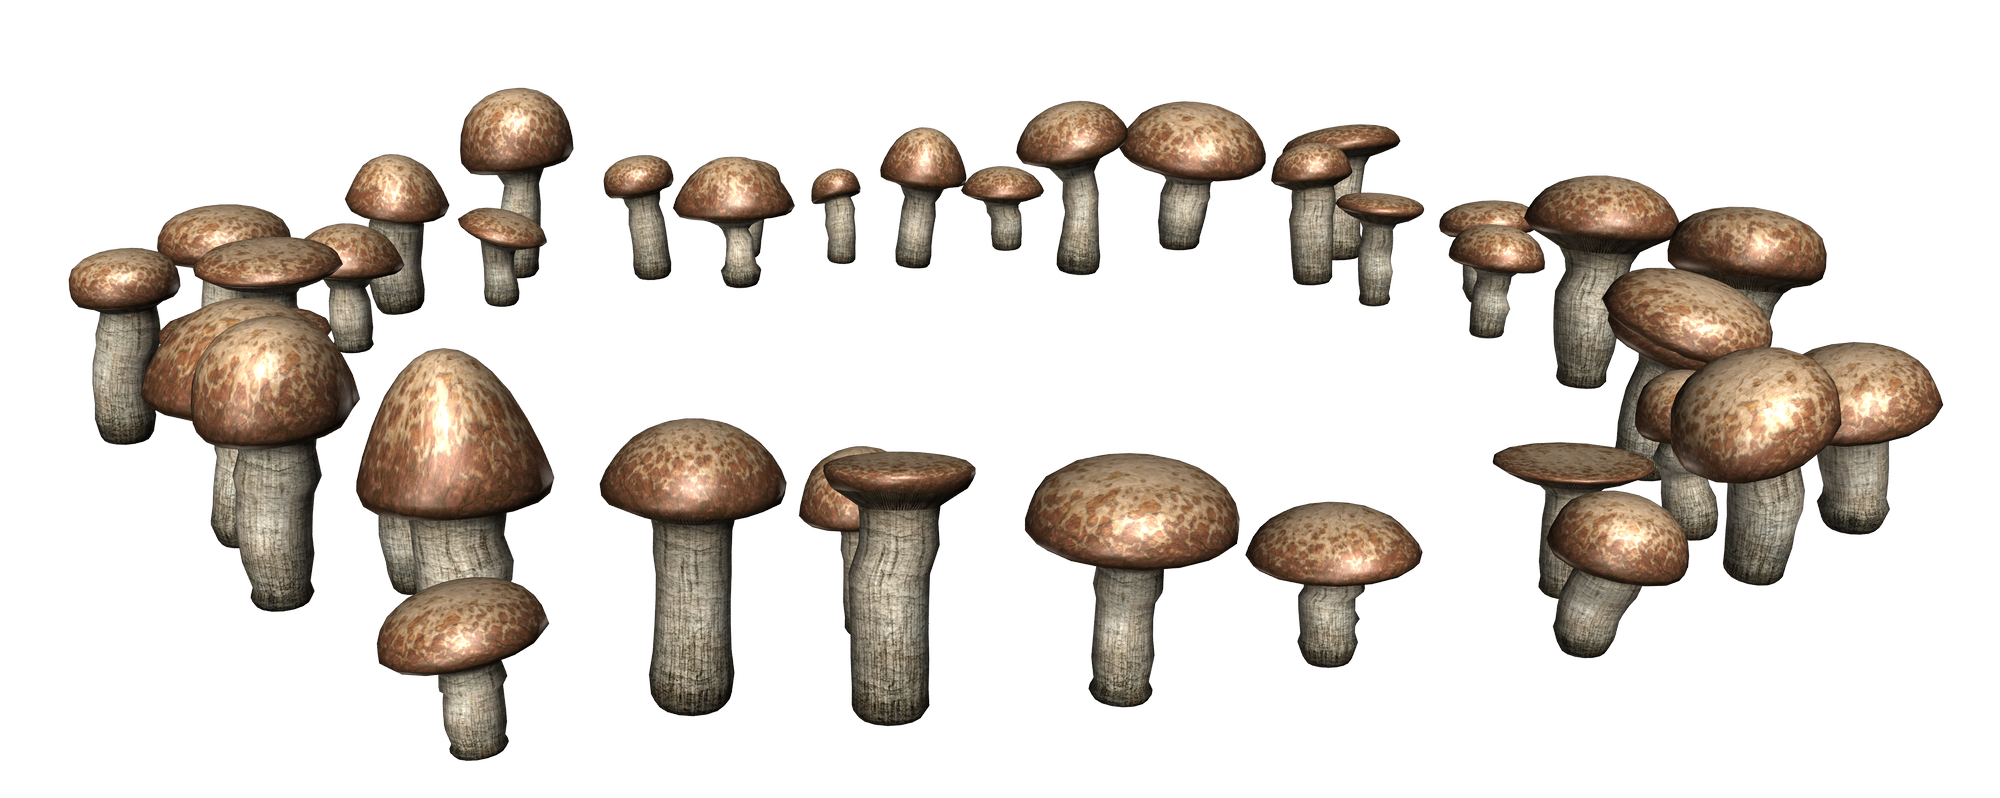 grzyby - mushrooms009.png